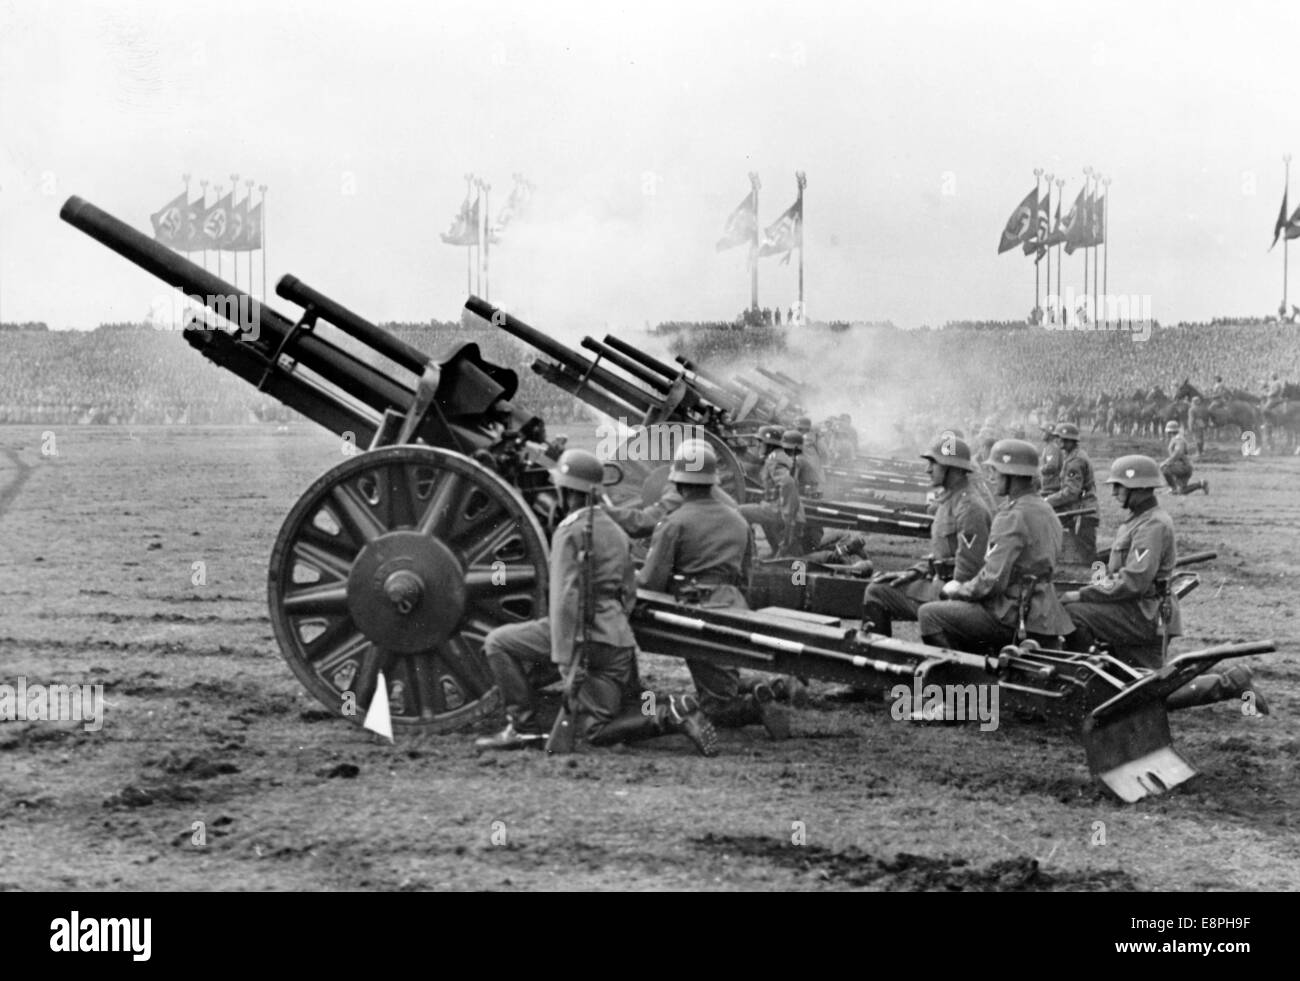 Nuremberg Rally 1937 in Nuremberg, Germany - Nazi party rally grounds - Demonstration by the Nazi armed forces (Wehrmacht) on Zeppelin Field, here heavy artillery. (Flaws in quality due to the historic picture copy) Fotoarchiv für Zeitgeschichtee - NO WIRE SERVICE - Stock Photo